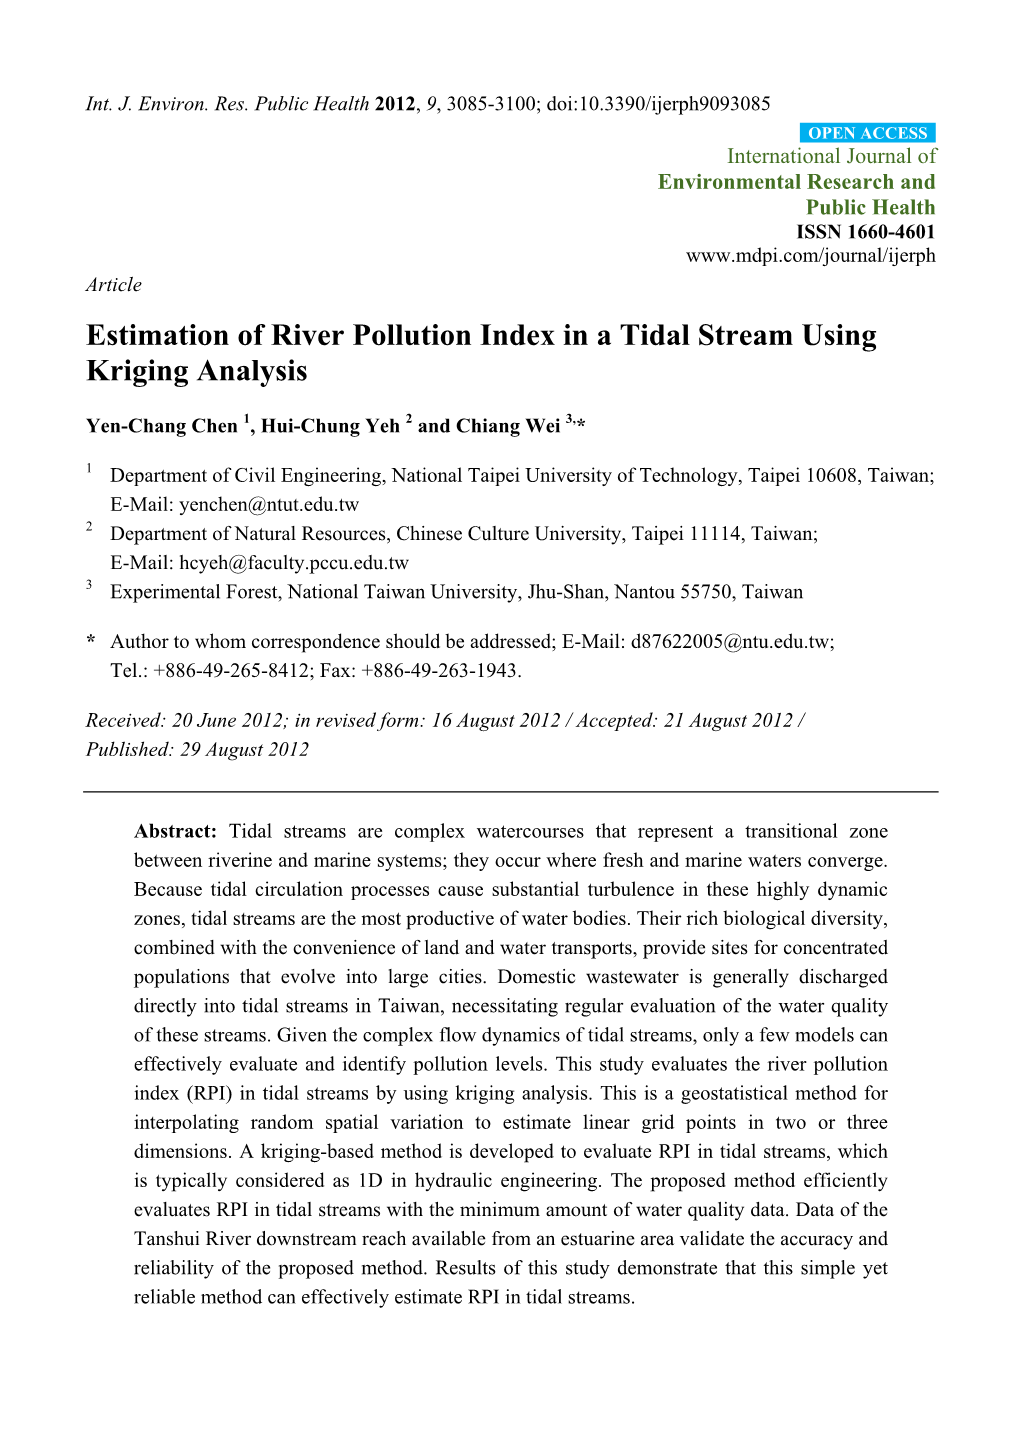 Estimation of River Pollution Index in a Tidal Stream Using Kriging Analysis